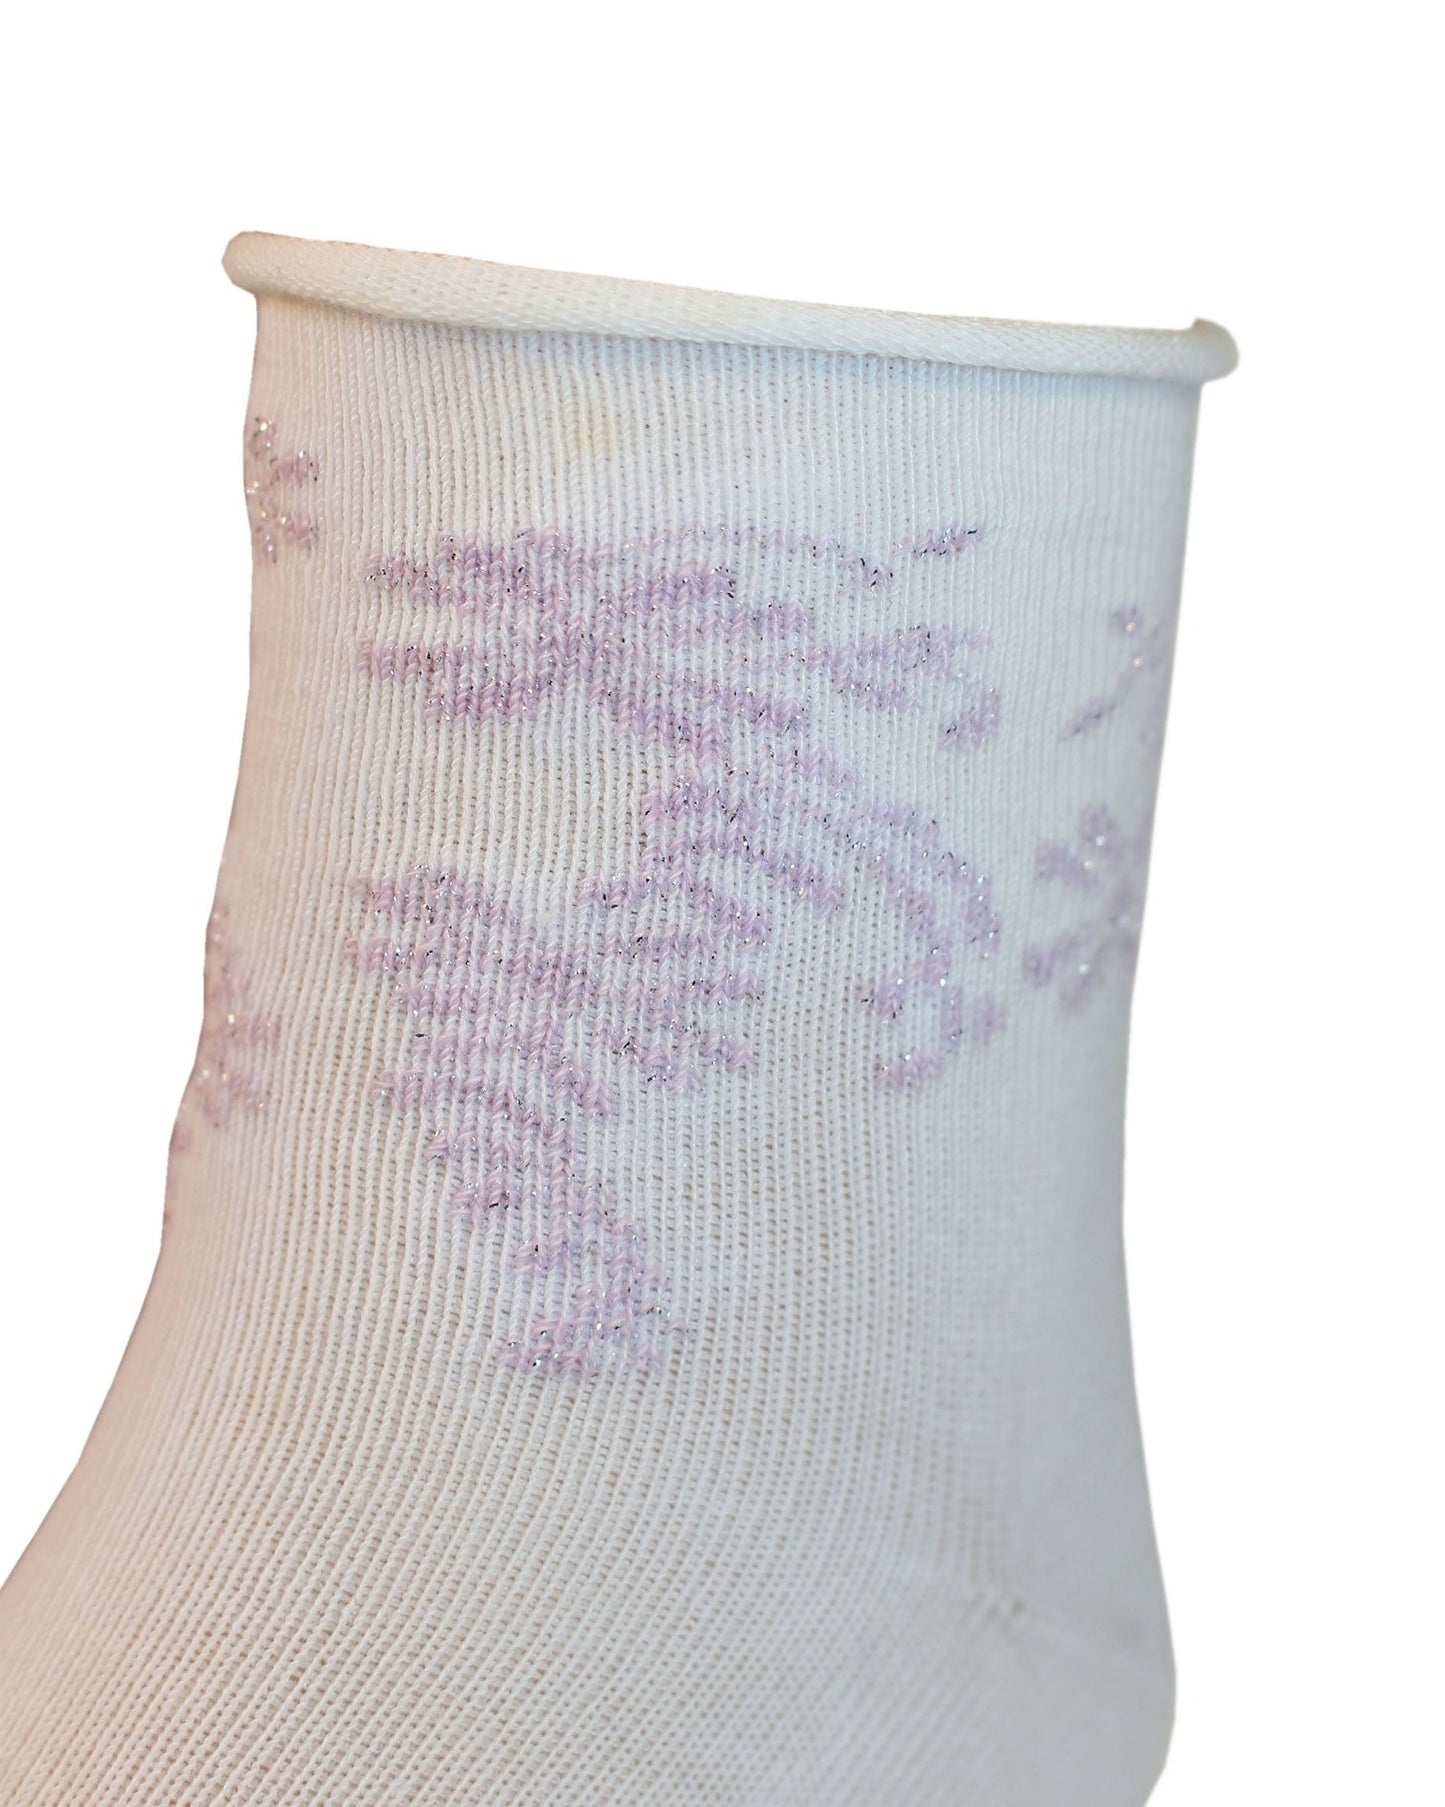 Omsa Dessert Calzino - White children's cotton no cuff ankle socks with a sparkly lilac coloured woven floral leaf style pattern around the cuff.